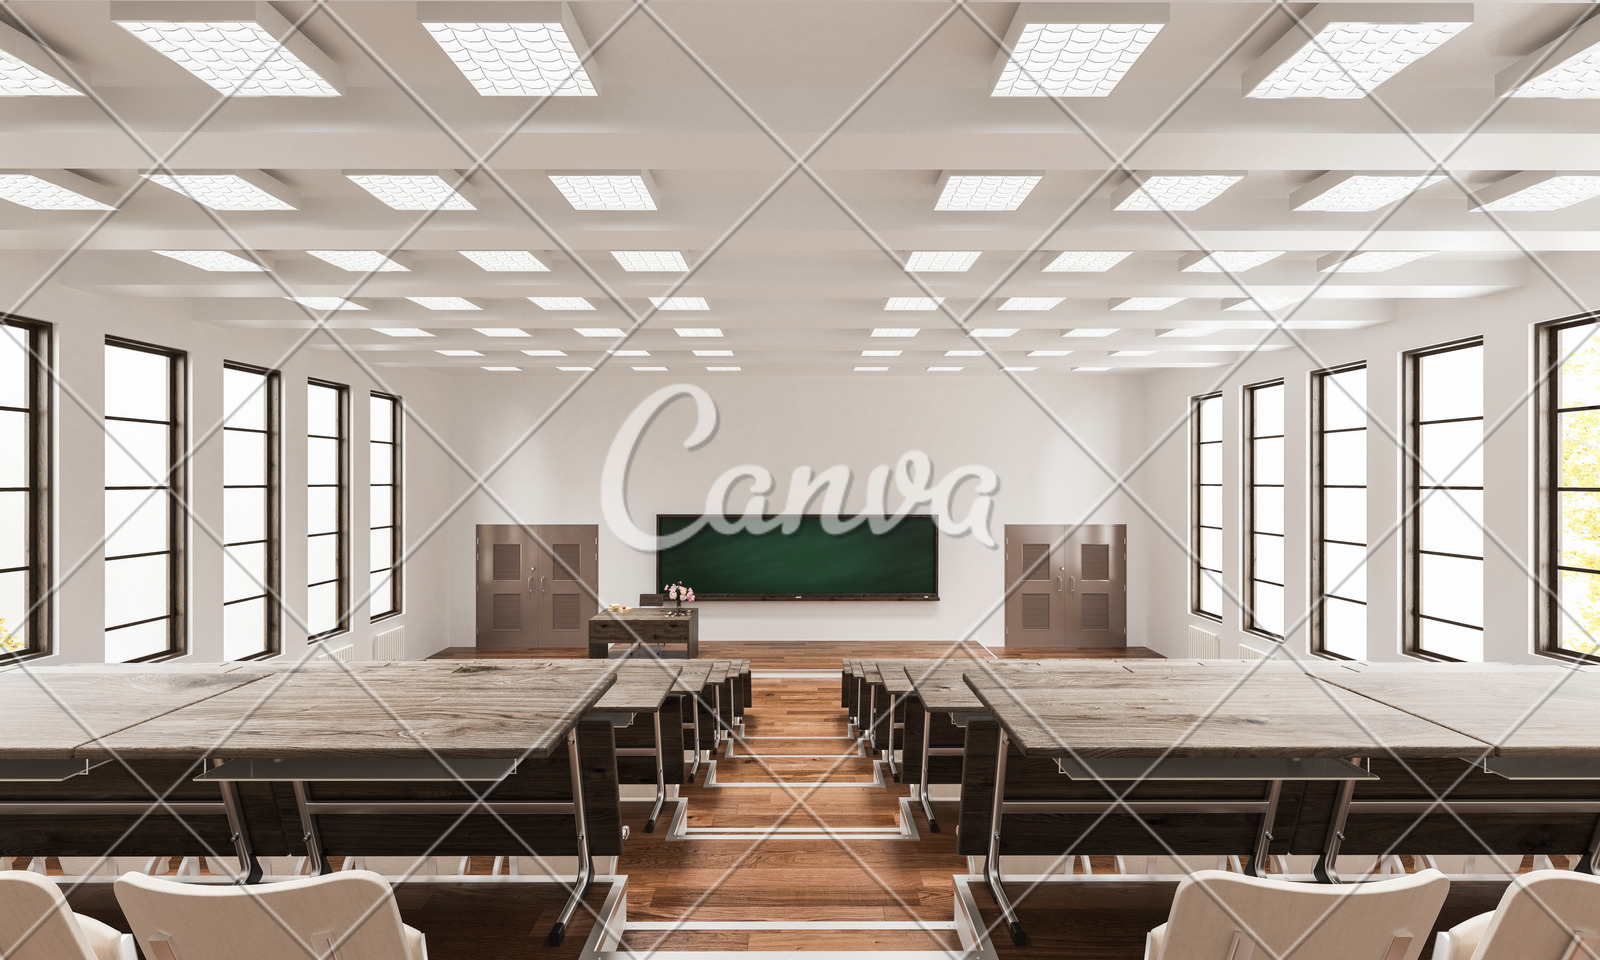 Interior Of A Lecture Hall As Seen From The Rear Photos By